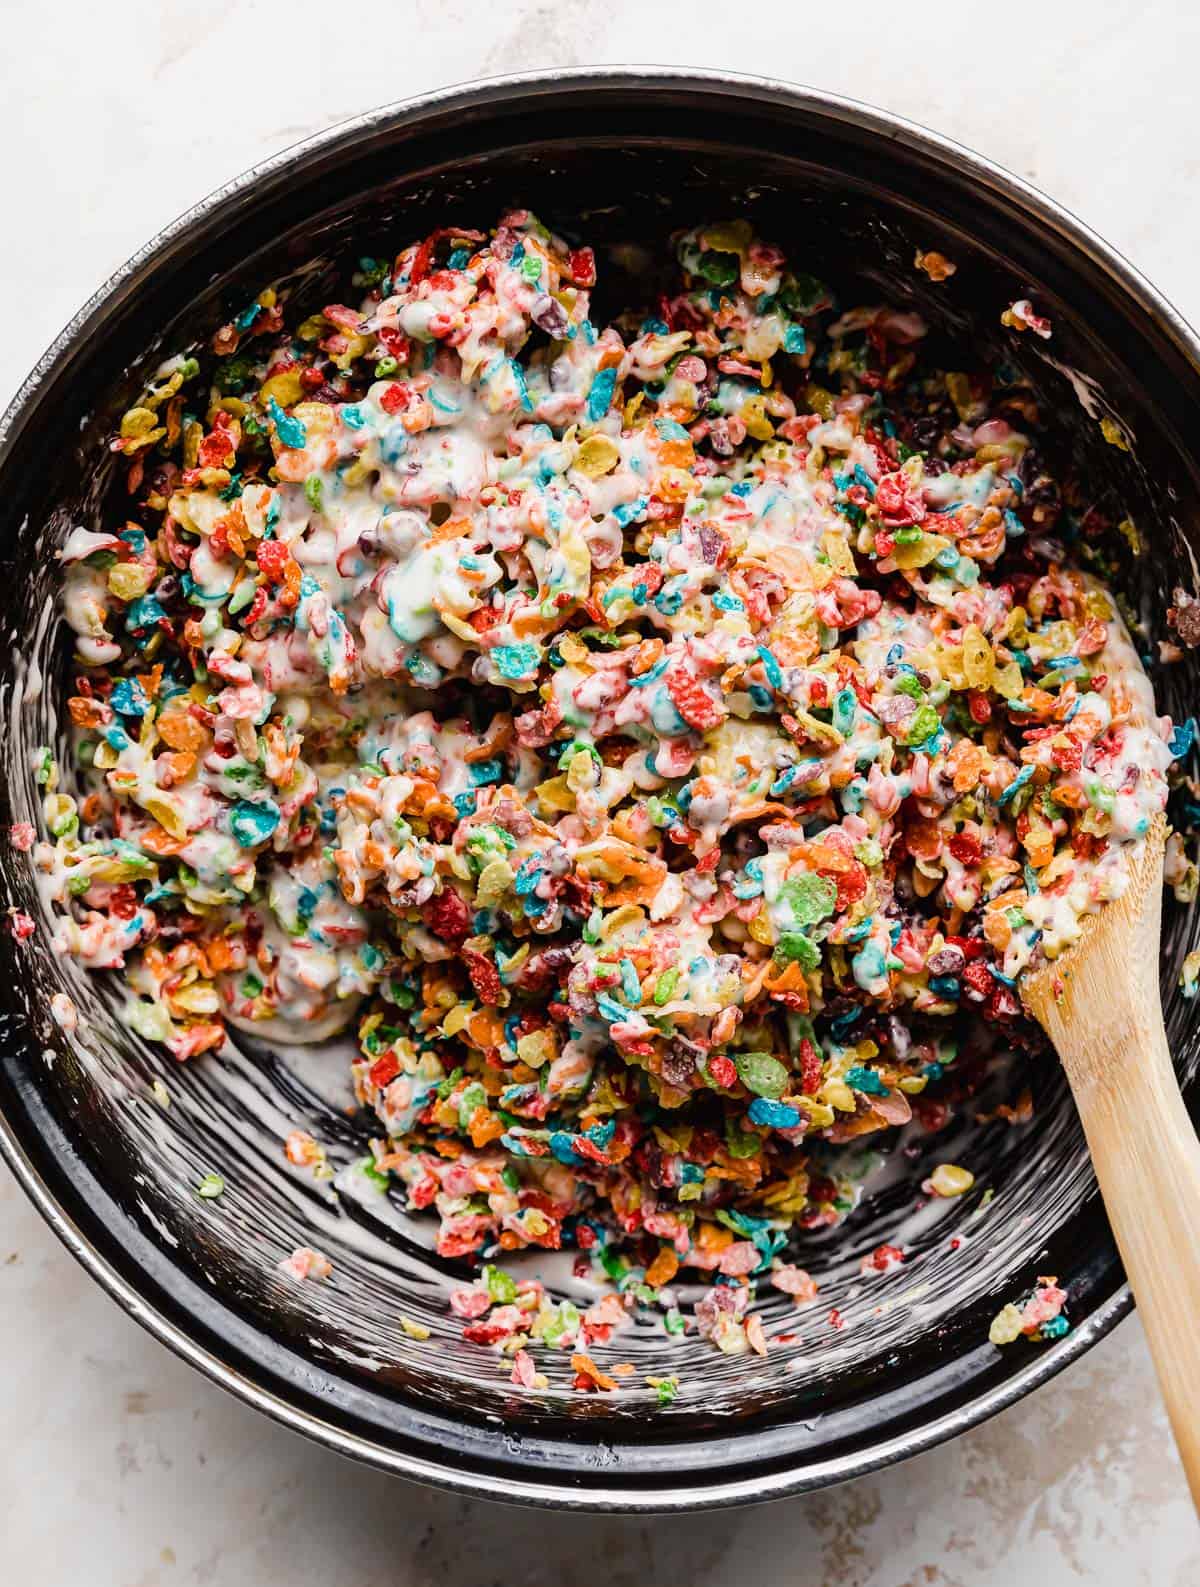 A close up photo of fruity pebbles mixed into melted marshmallows.